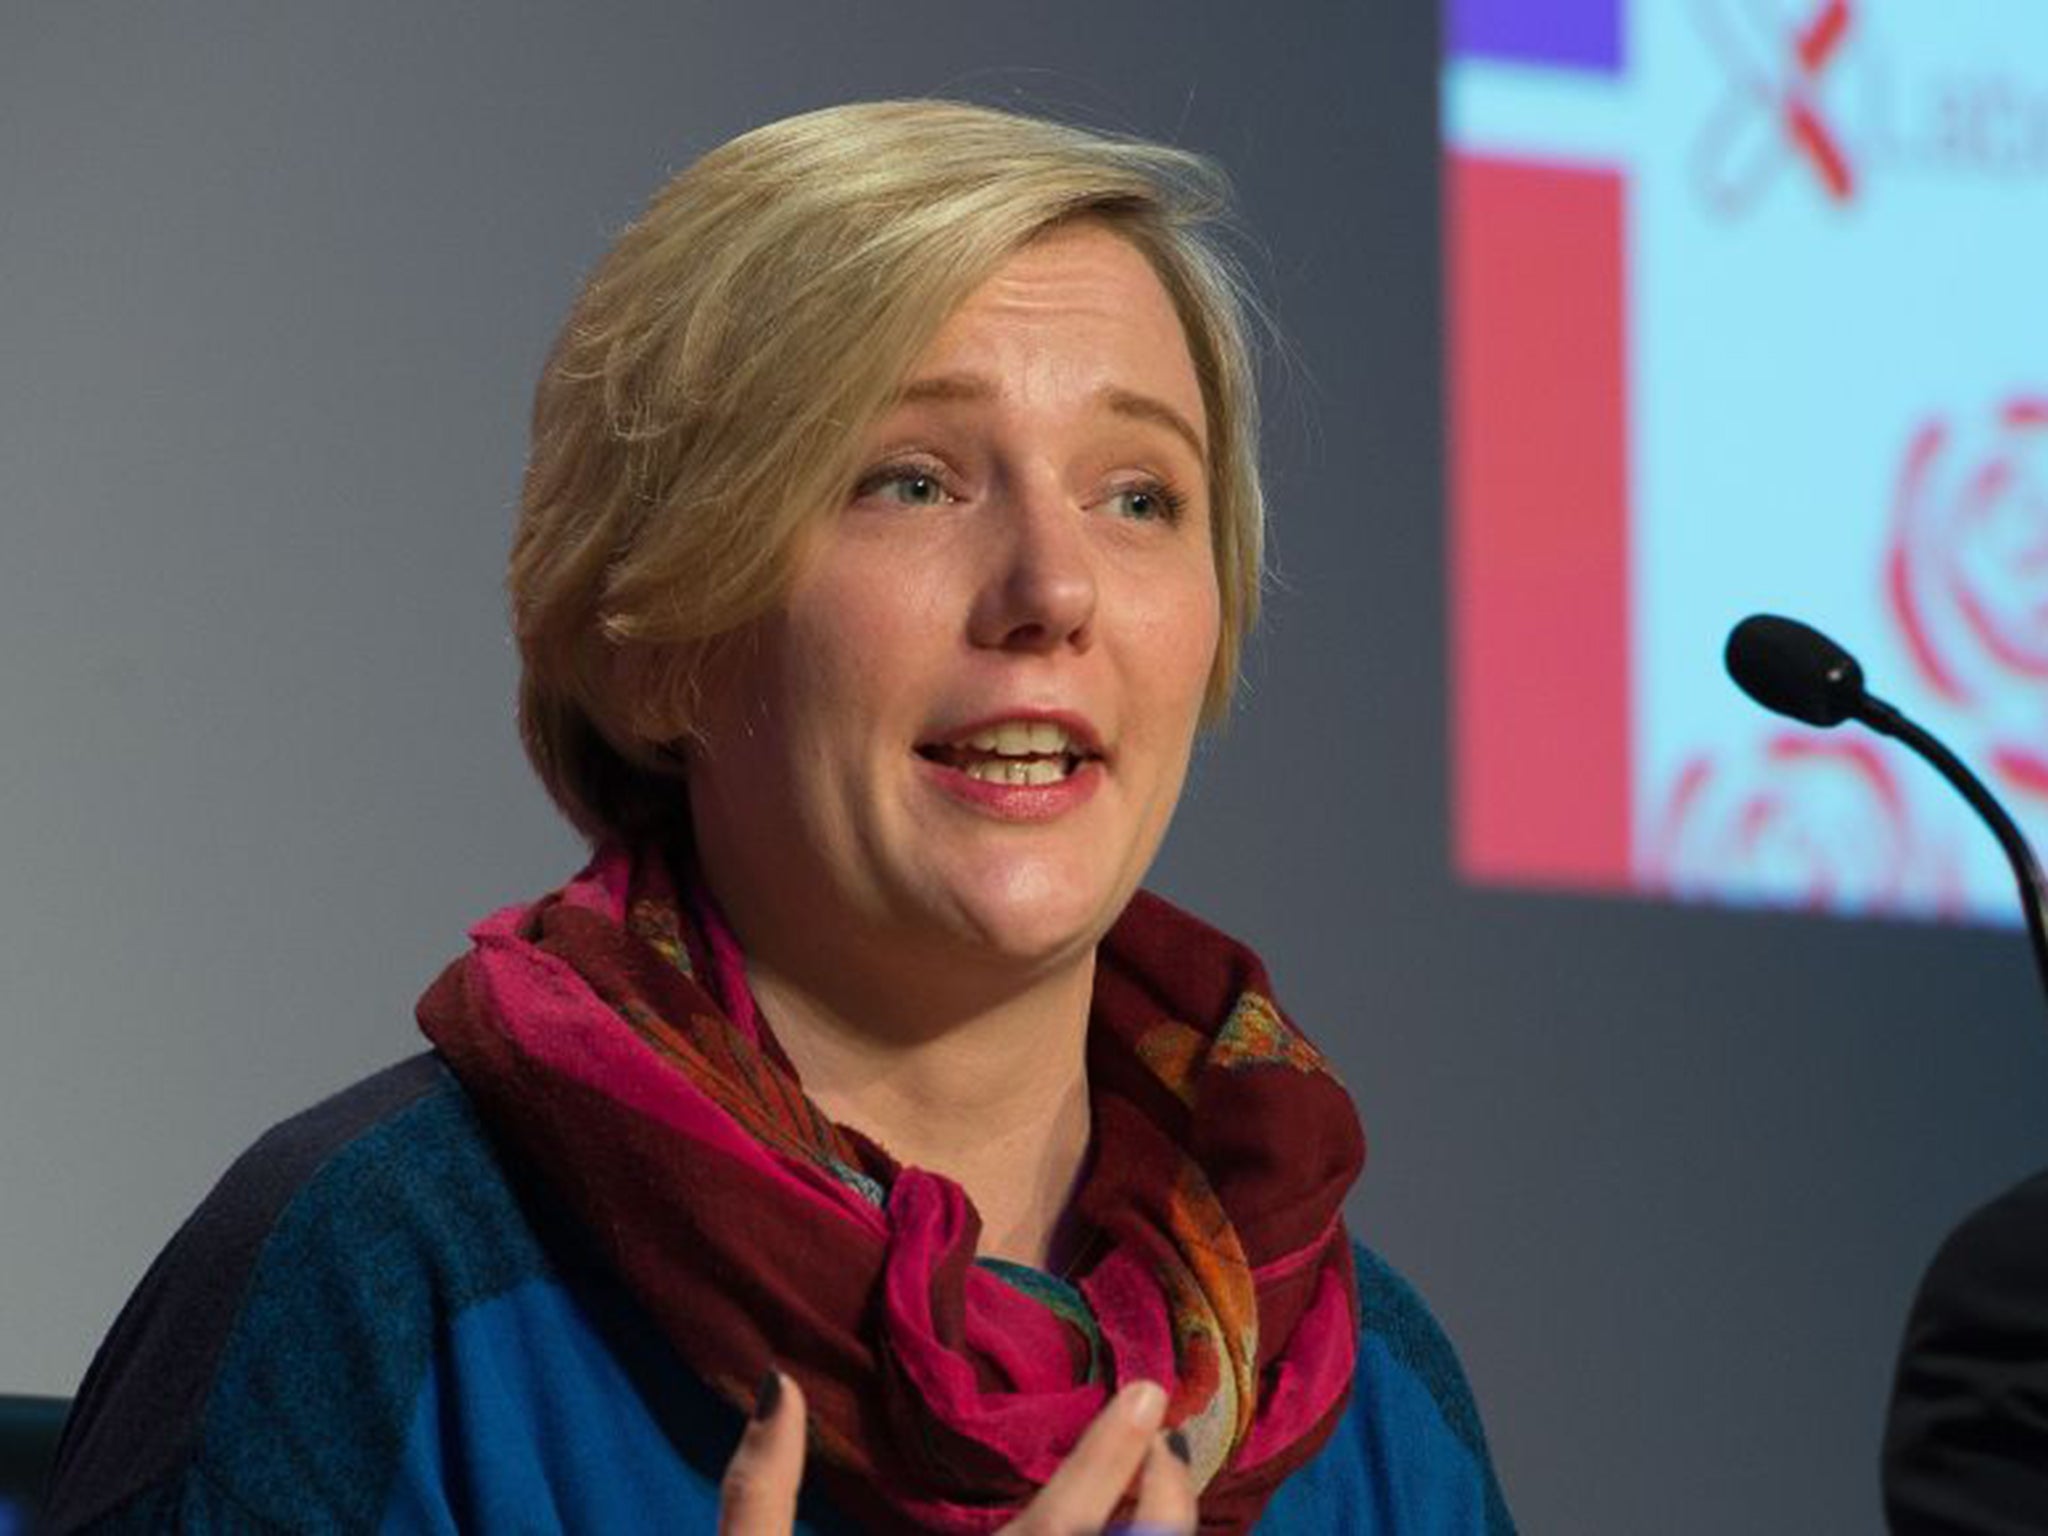 Back in May Stella Creasy came joint top on 29 per cent in a survey polling deputy leadership candidates